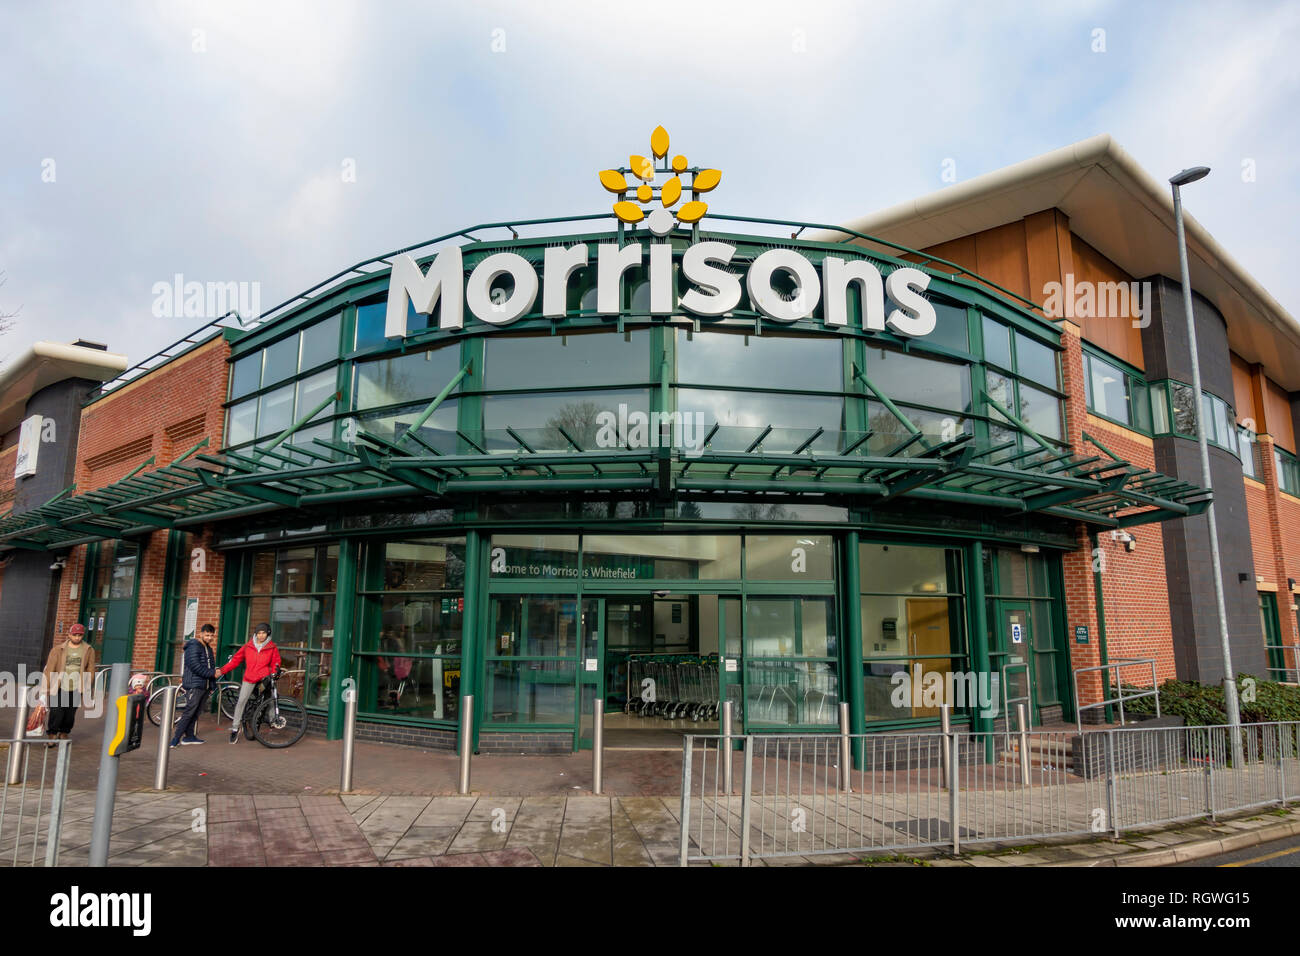 Morrisons supermarket sign in Whitefield, Bury. Stock Photo